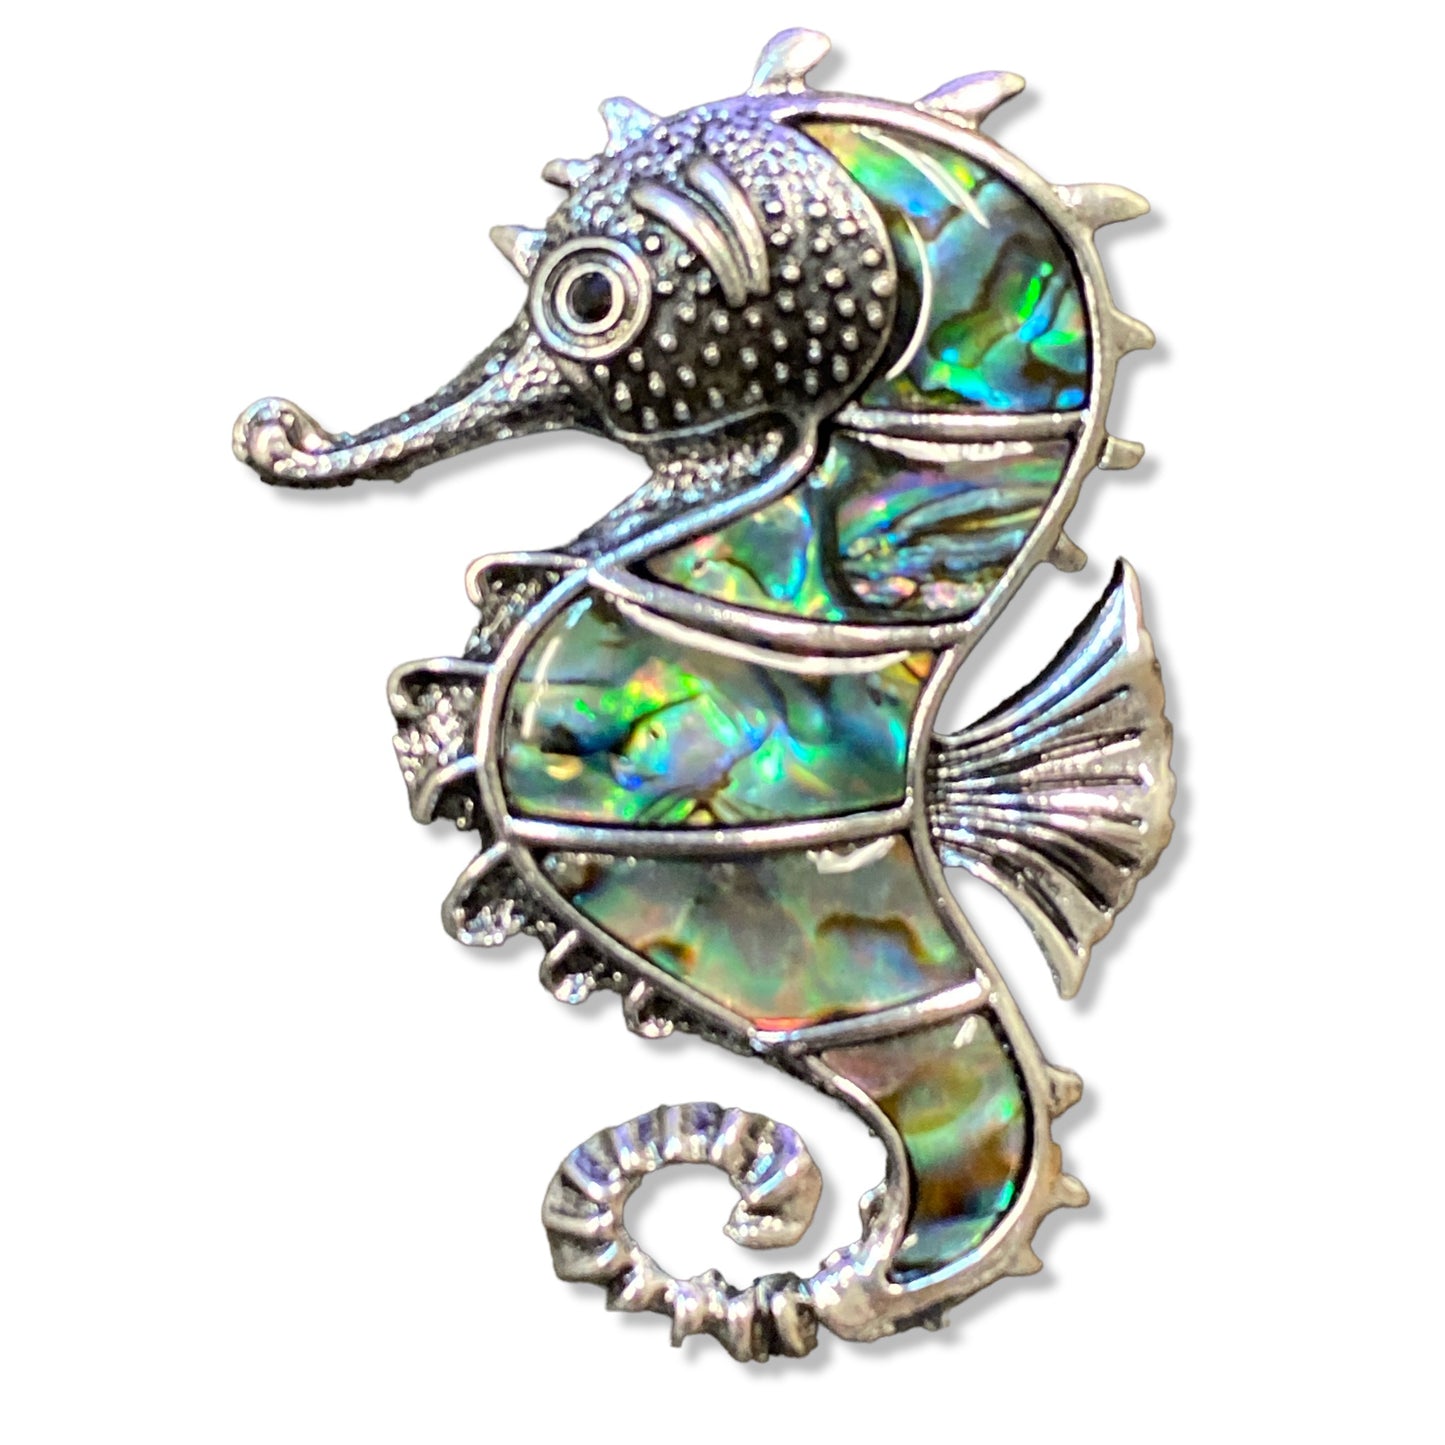 Seahorse Design Brooch with Abalone Shell inlay - Silver Color Plated Metal - 45mm - China - NEW123